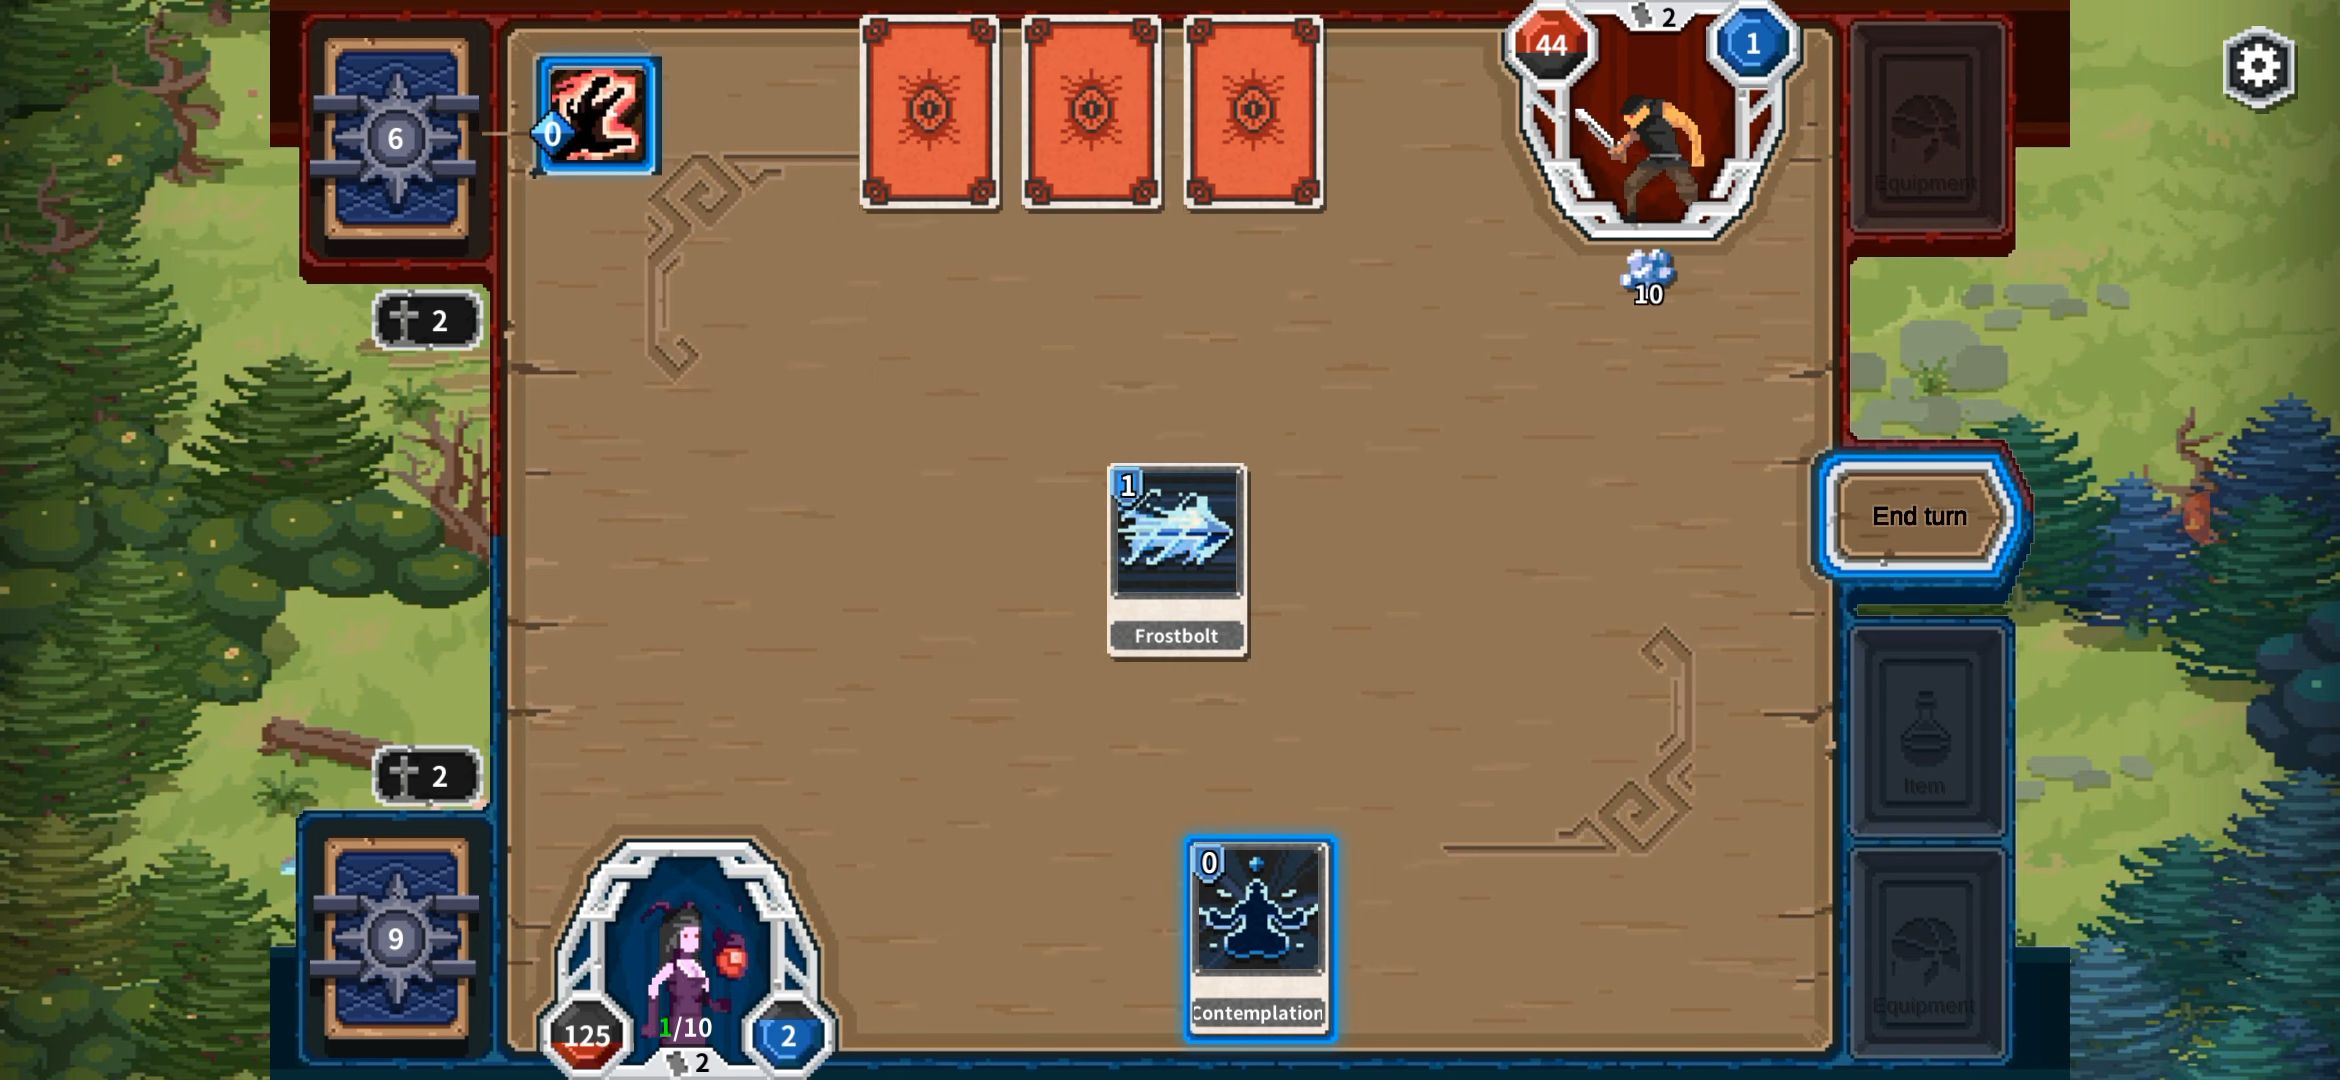 Gameplay of the Pixelverse - Deck Heroes for Android phone or tablet.